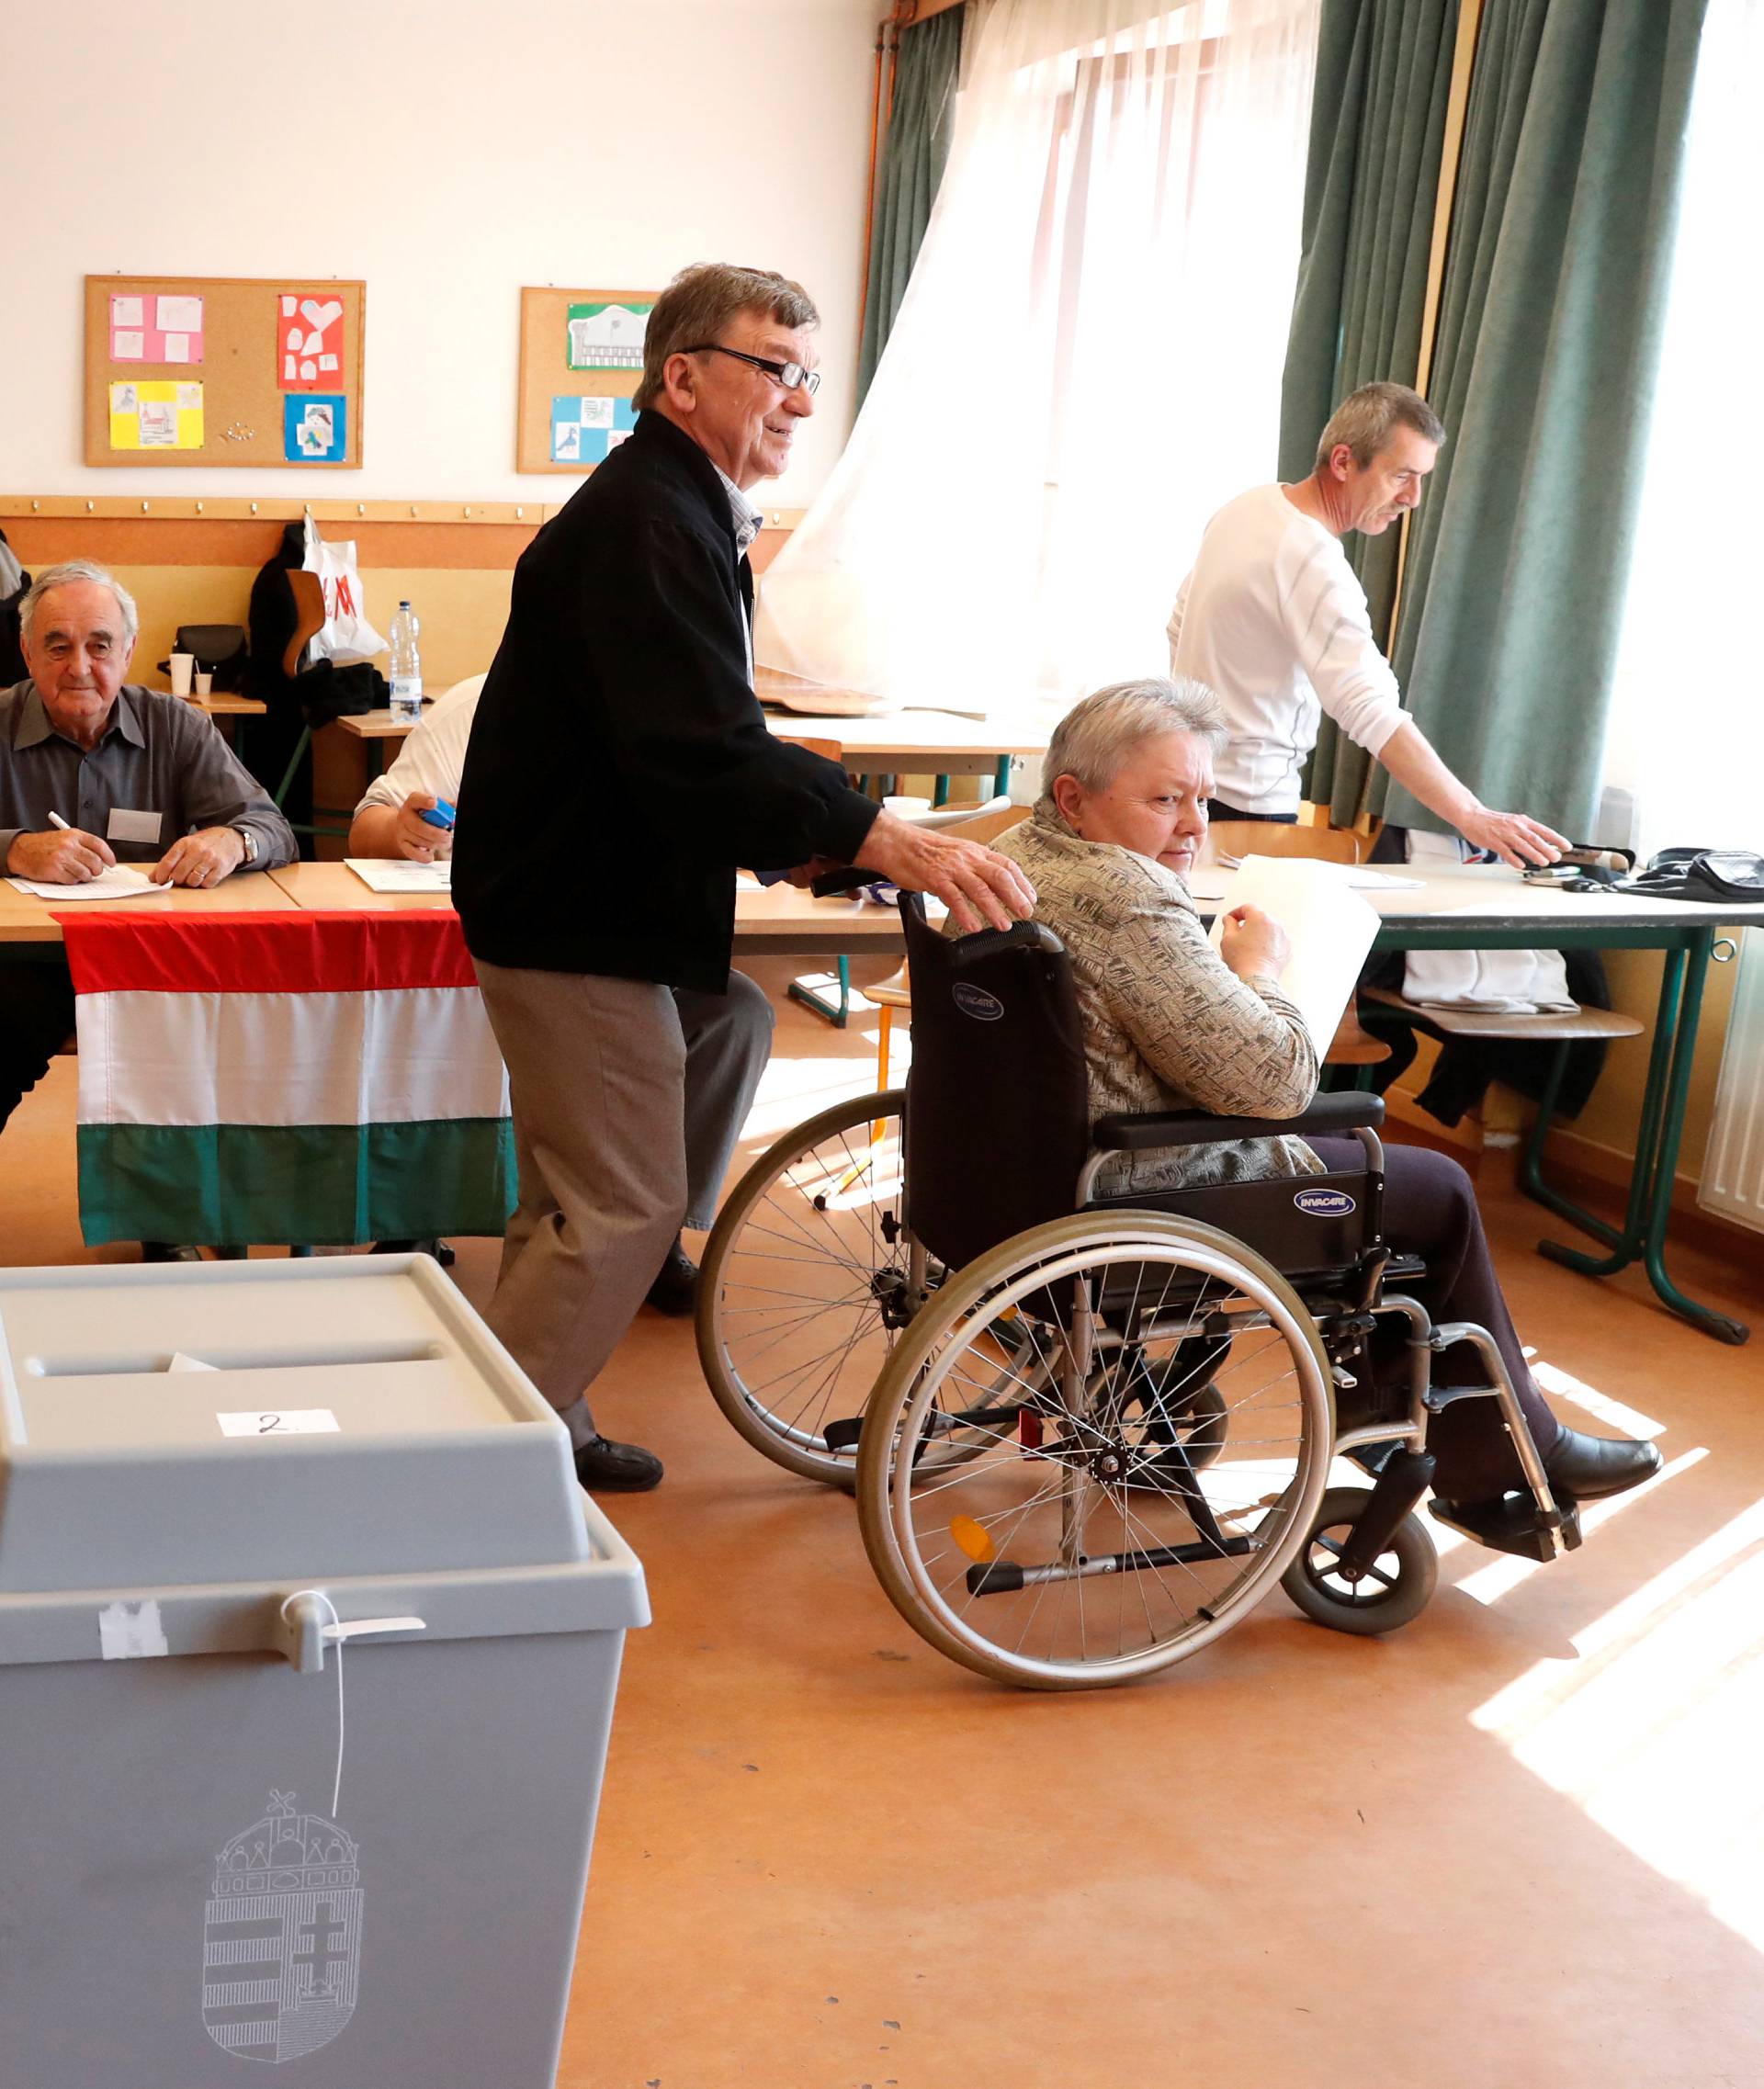 Hungarians attend the Hungarian parliamentary elections at a polling station in Veresegyhaz